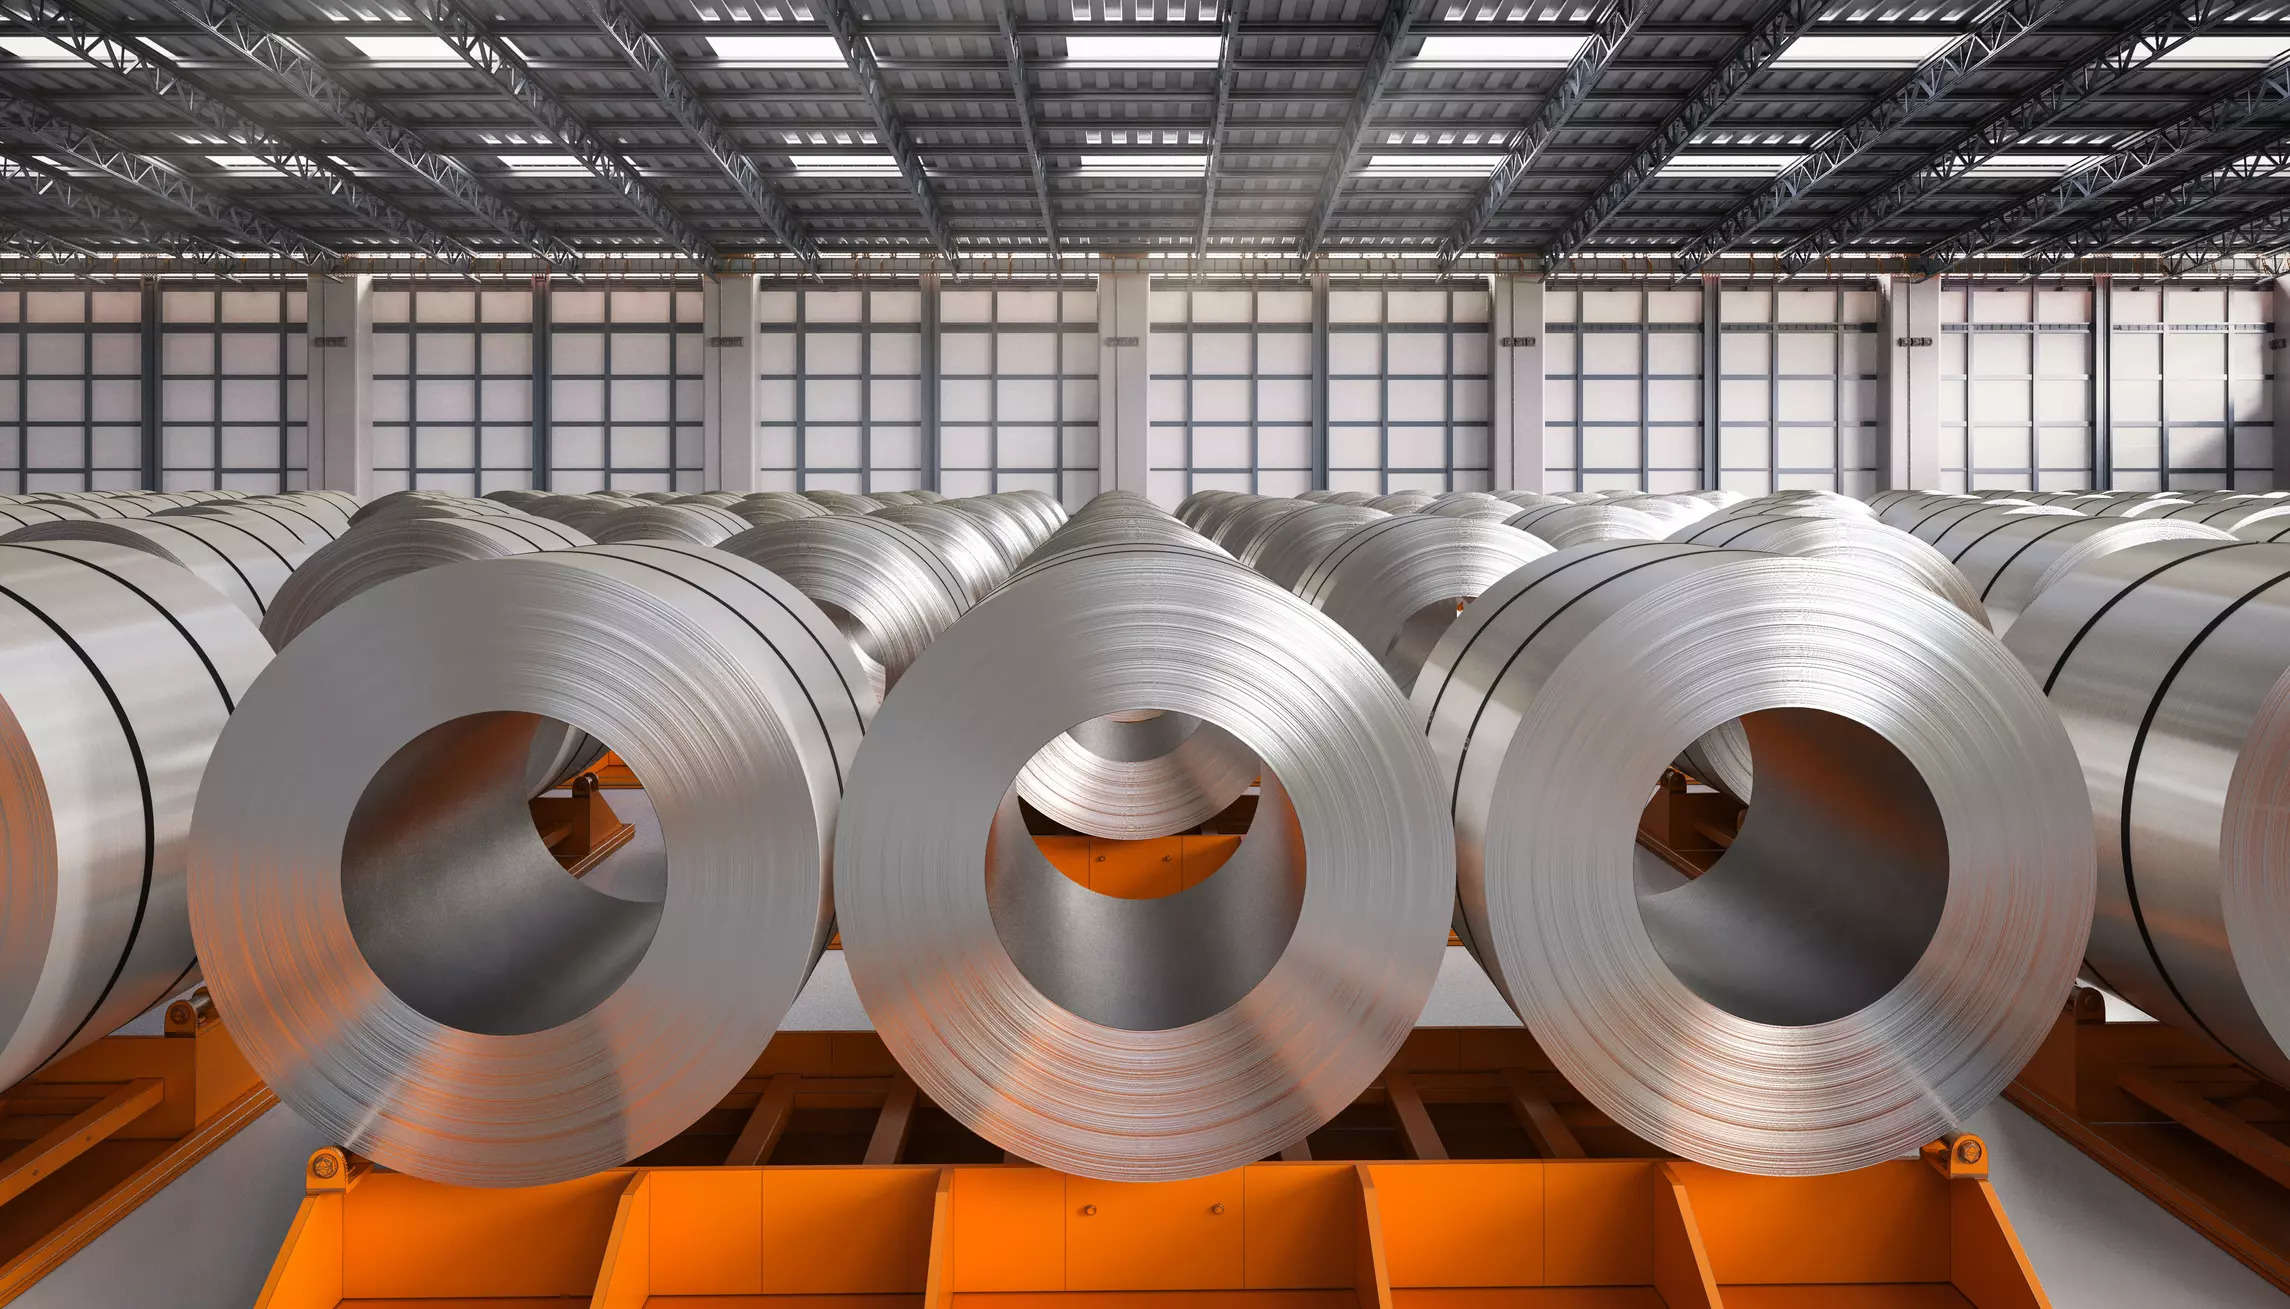  India's aluminium producers are expected to raise their combined production capacity to 4.6 million tonnes in the next two years, up from 4.1 million tonnes now.